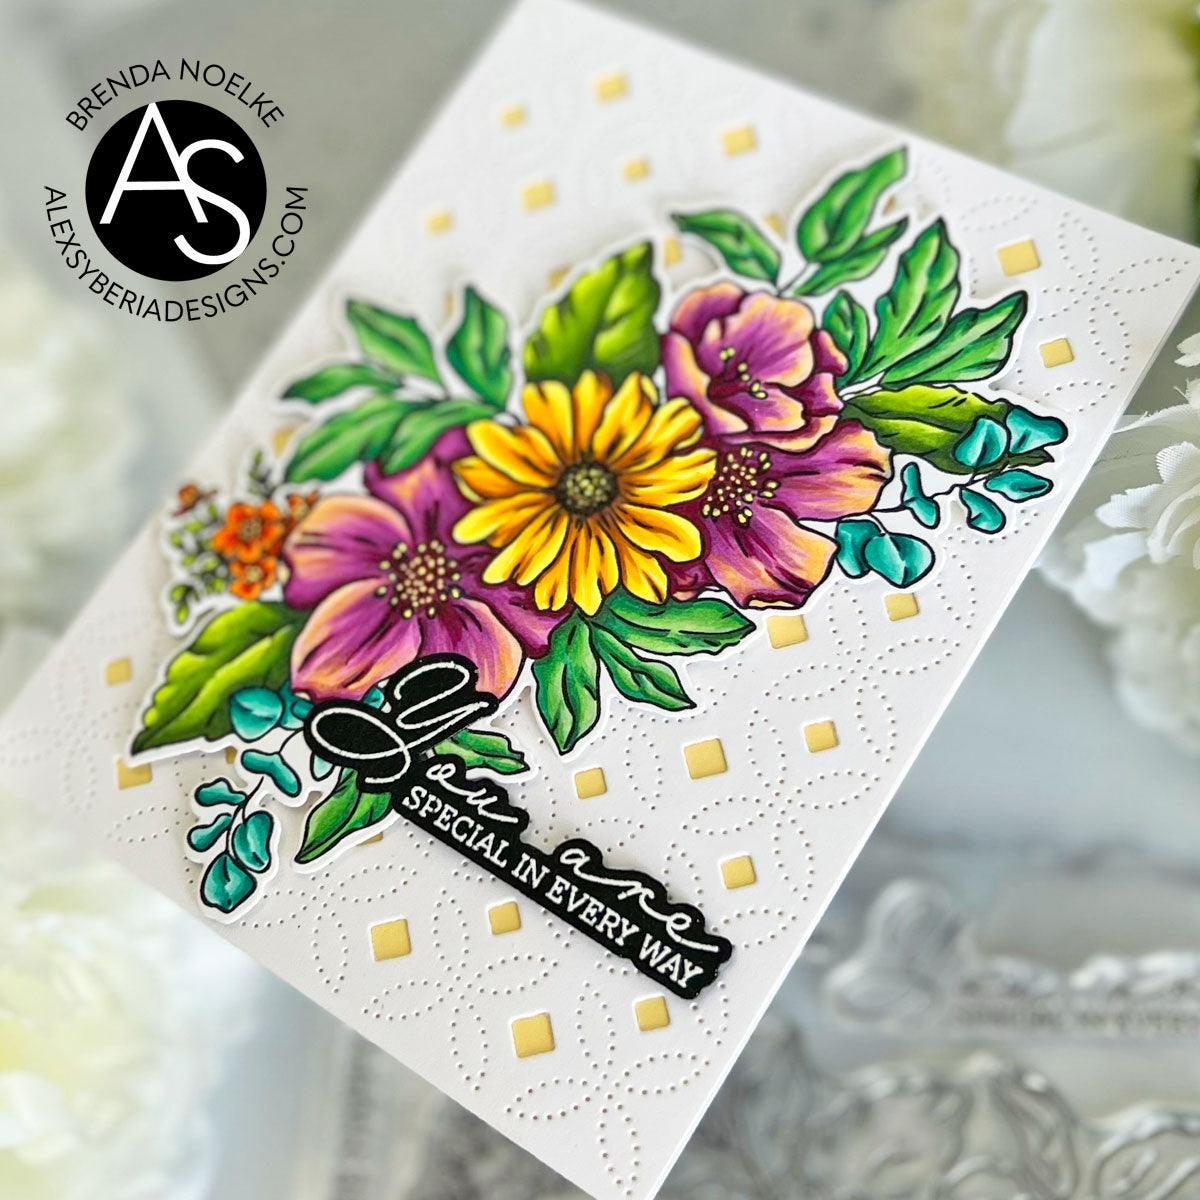 Life-is-good-die-set-alex-syberia-designs-bouquet-layering-stamps-cardmaking-coloring-popular-brands-stencils-floral-bouquet